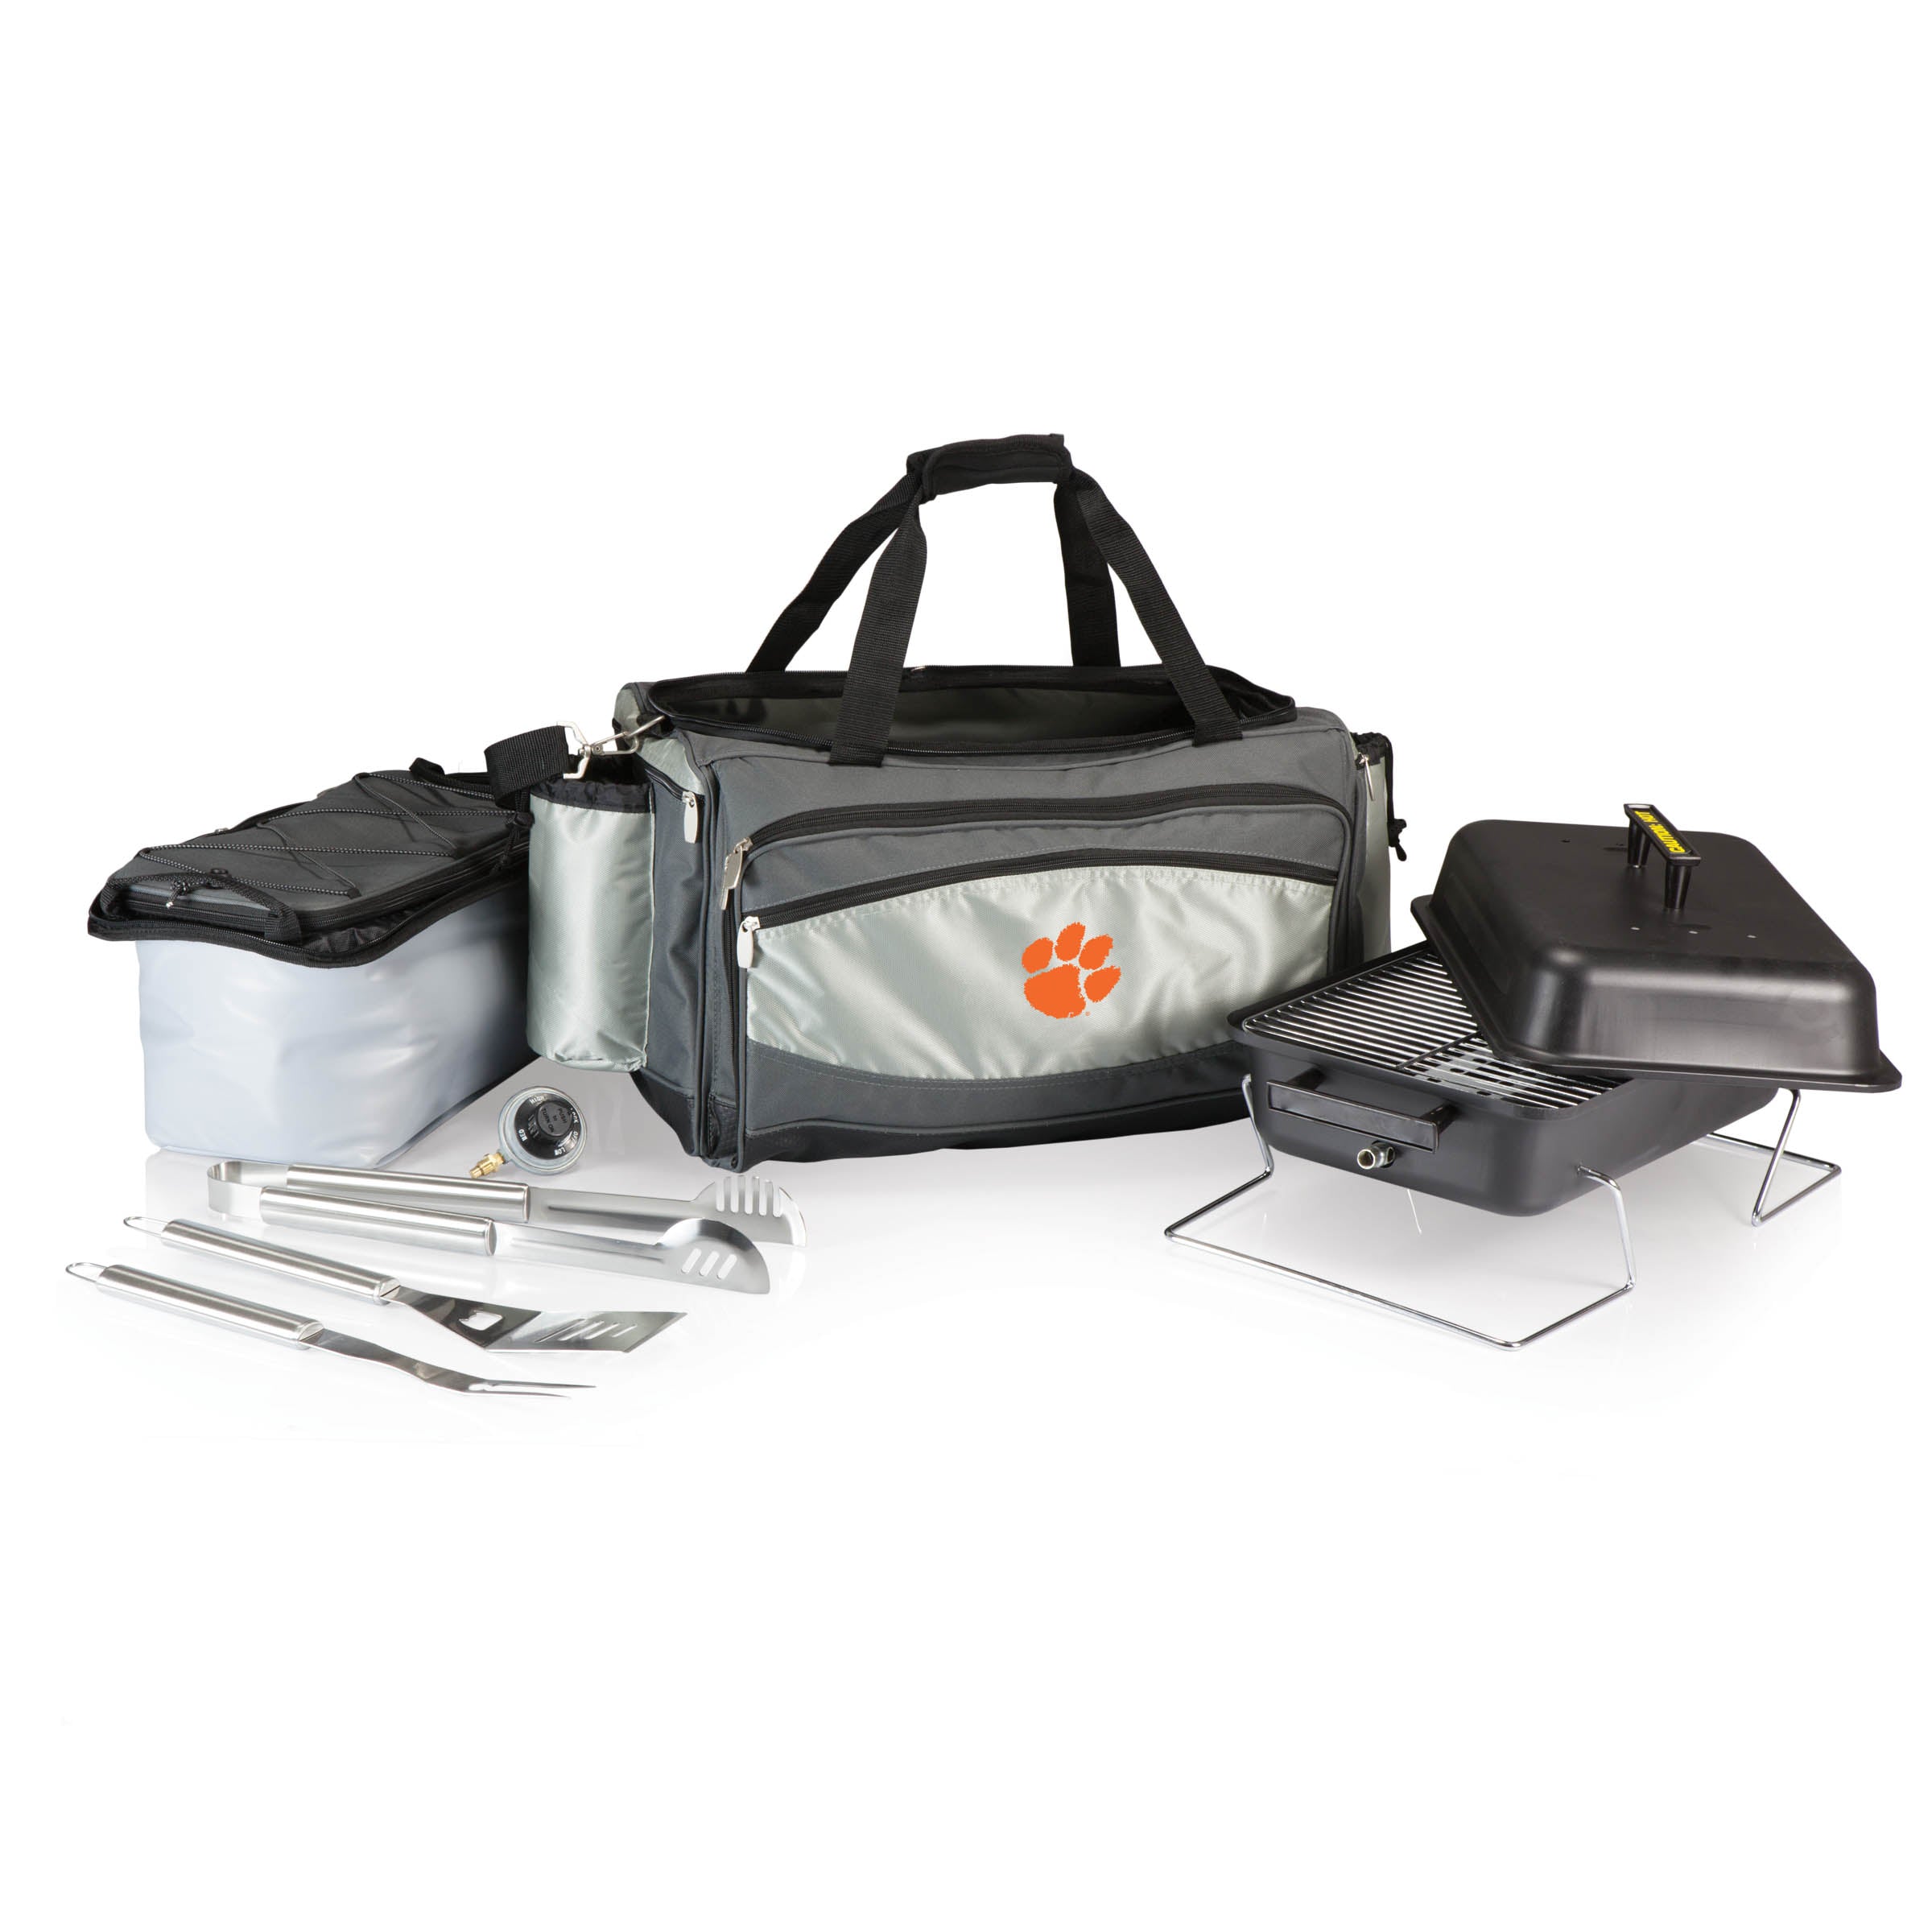 Clemson Tigers - Vulcan Portable Propane Grill & Cooler Tote